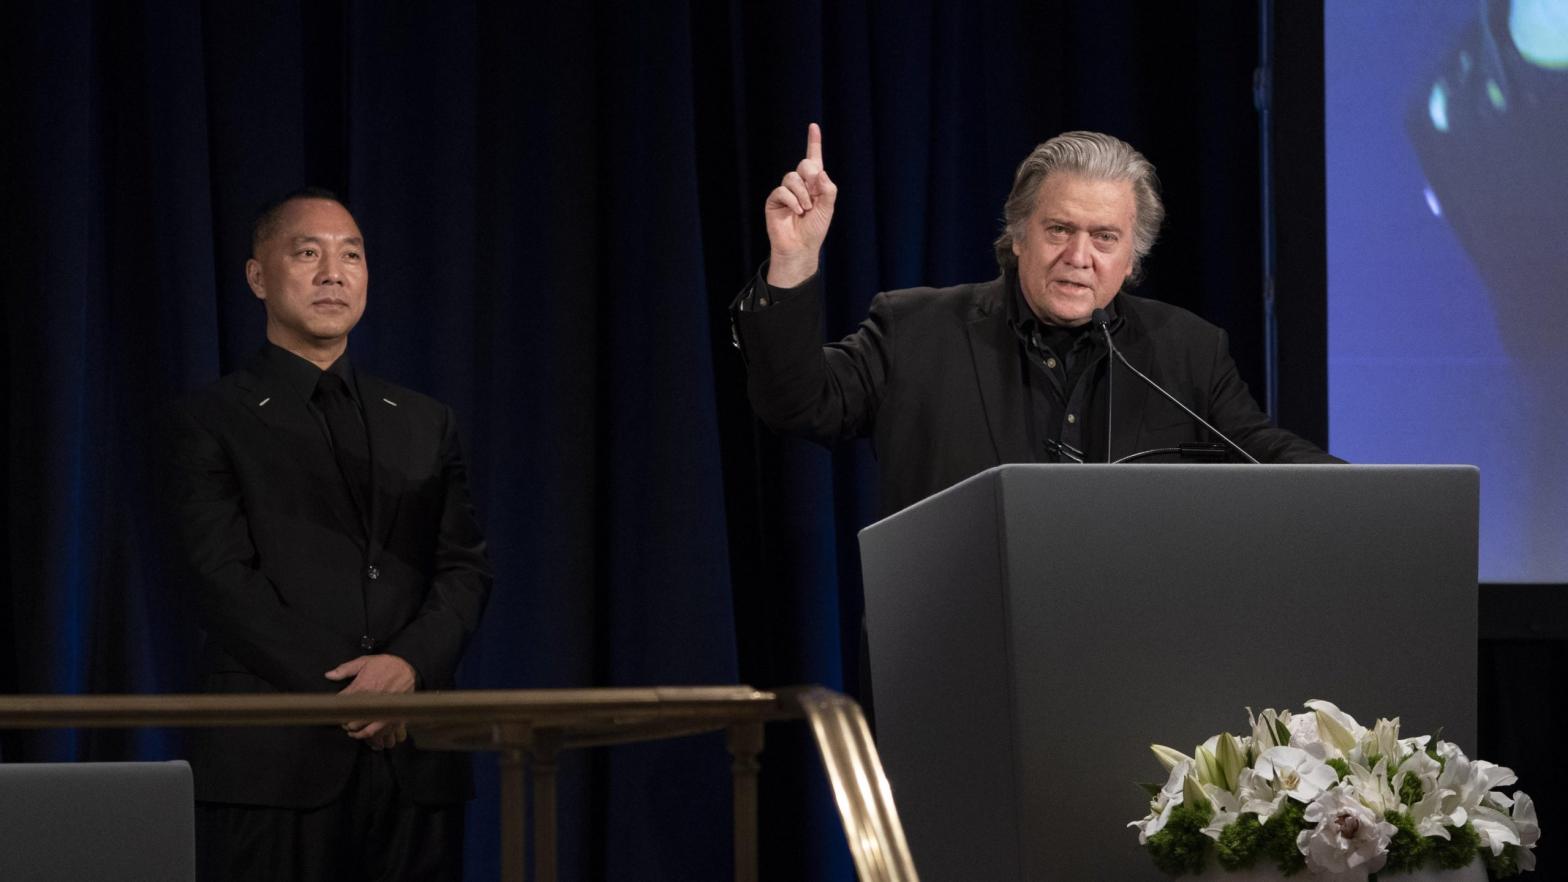 Guo Wengui, left, and Steve Bannon, right, at a news conference in November 2018 in New York. (Photo: Don Emmert/AFP, Getty Images)